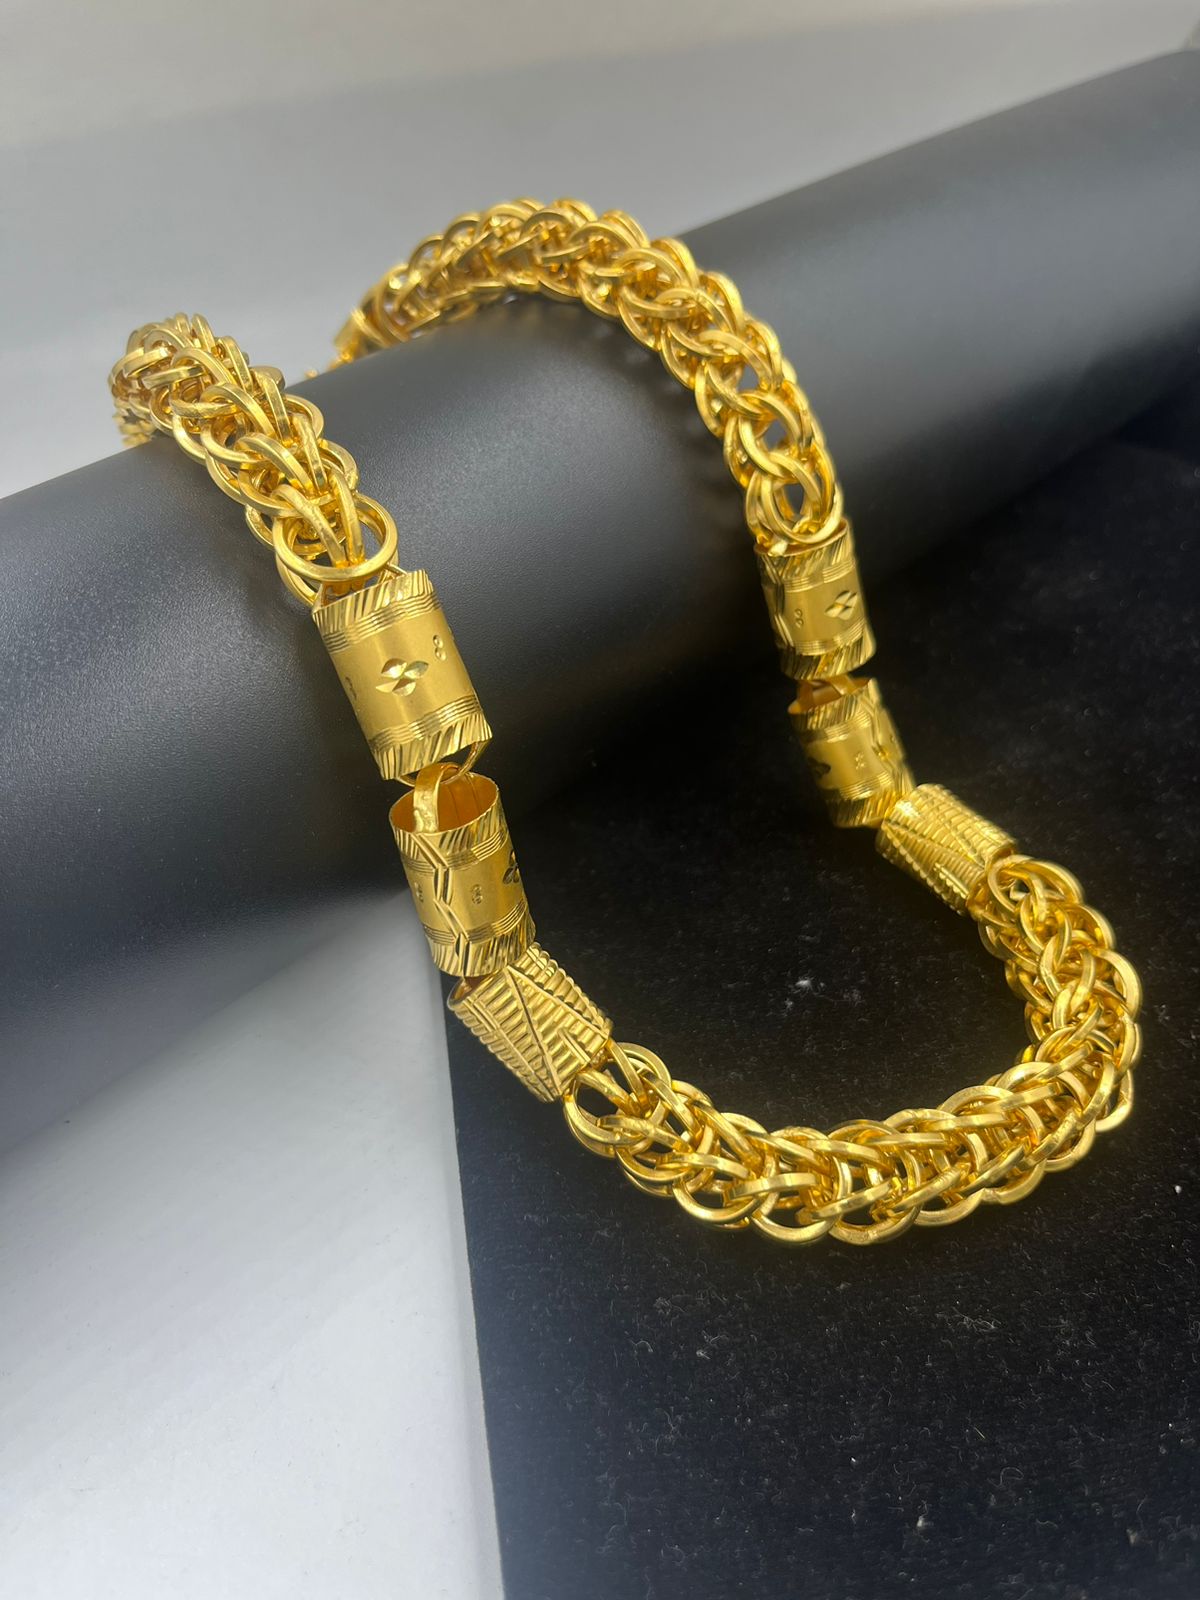 Pin by Paul Whittaker on gold jewellery | Gold chains for men, Man gold  bracelet design, Mens solid gold chains